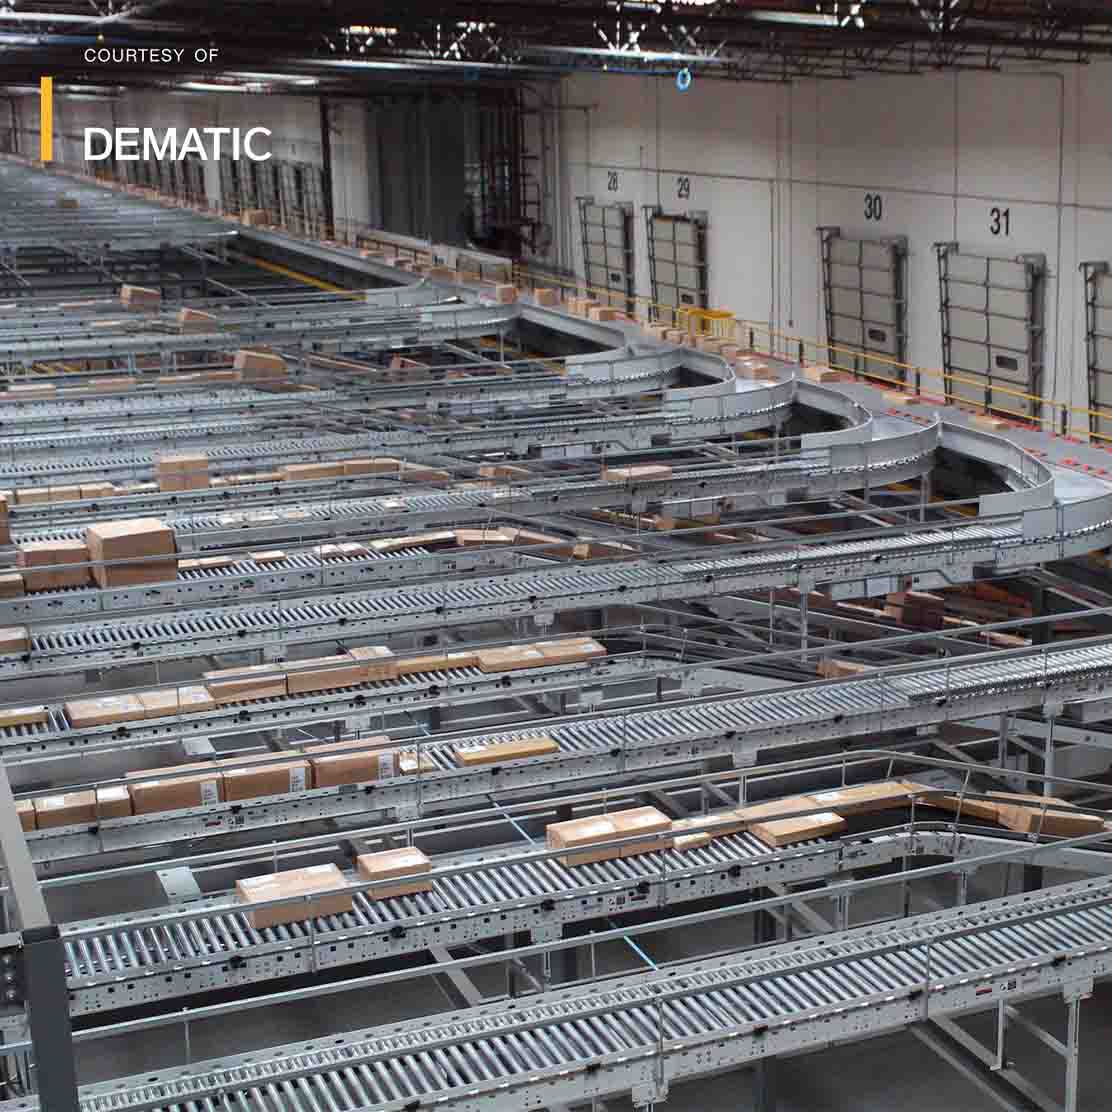 5 1 Crossdock Shipping 2 Conveyor Systems - About Dematic - Shoppa's Material Handling